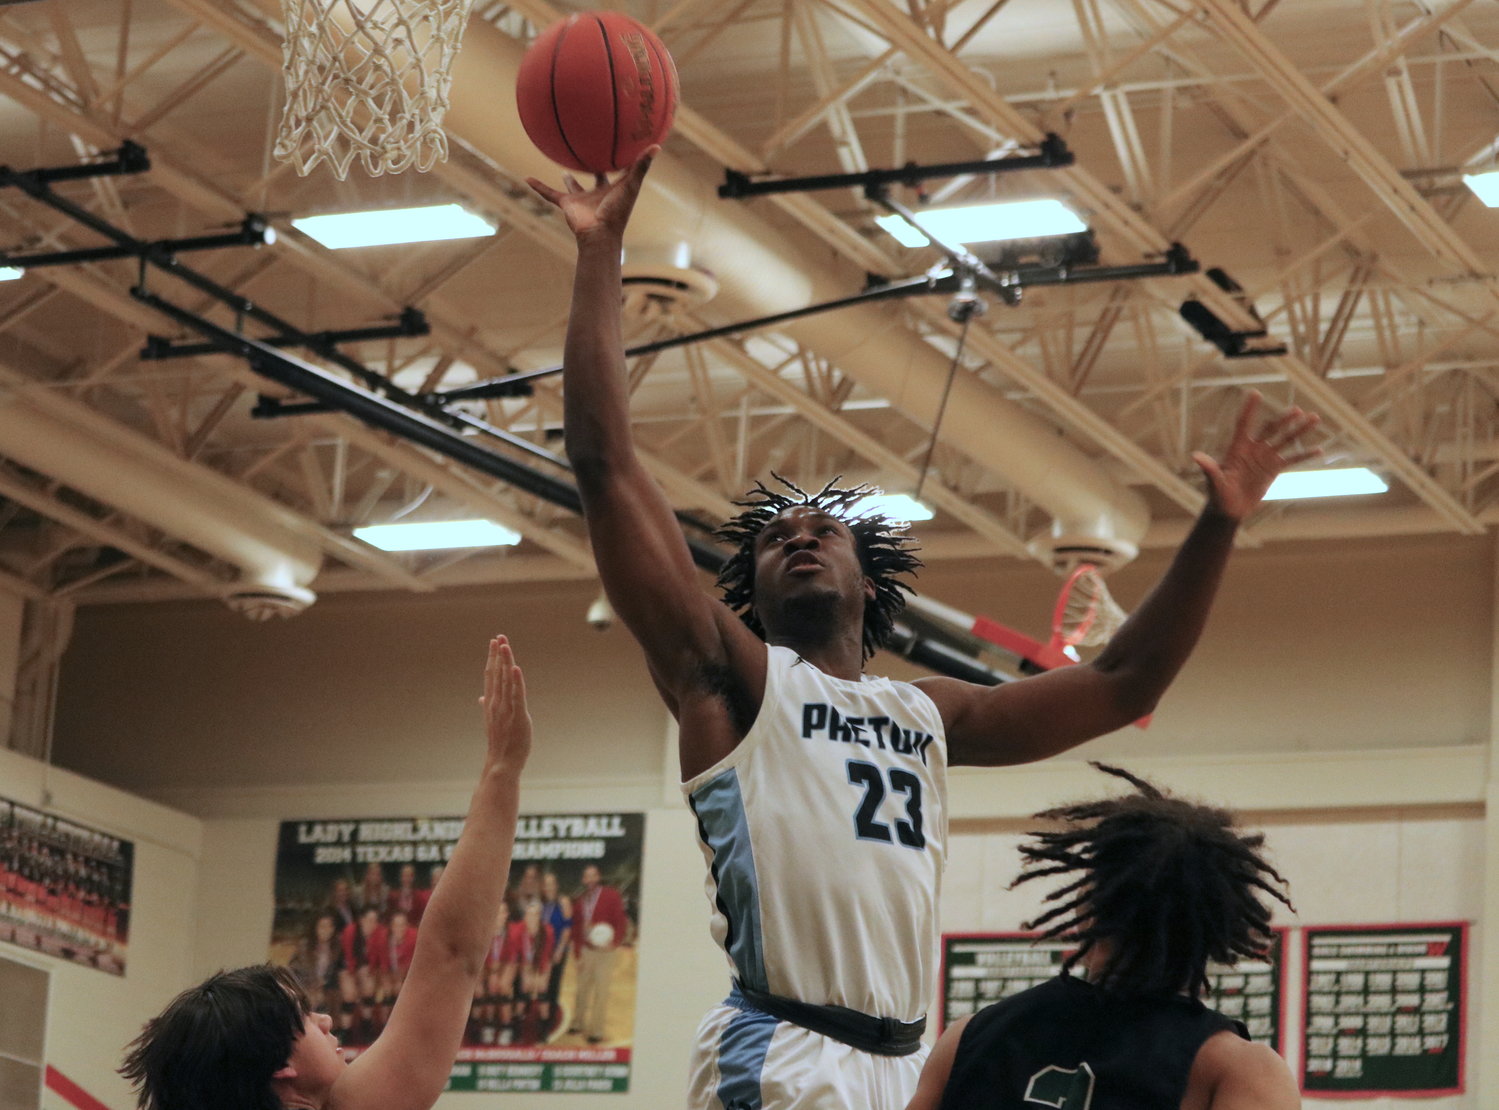 Charles Chukwu shoots a layup during Monday’s game between Paetow and Kingwood Park at The Woodlands High School.